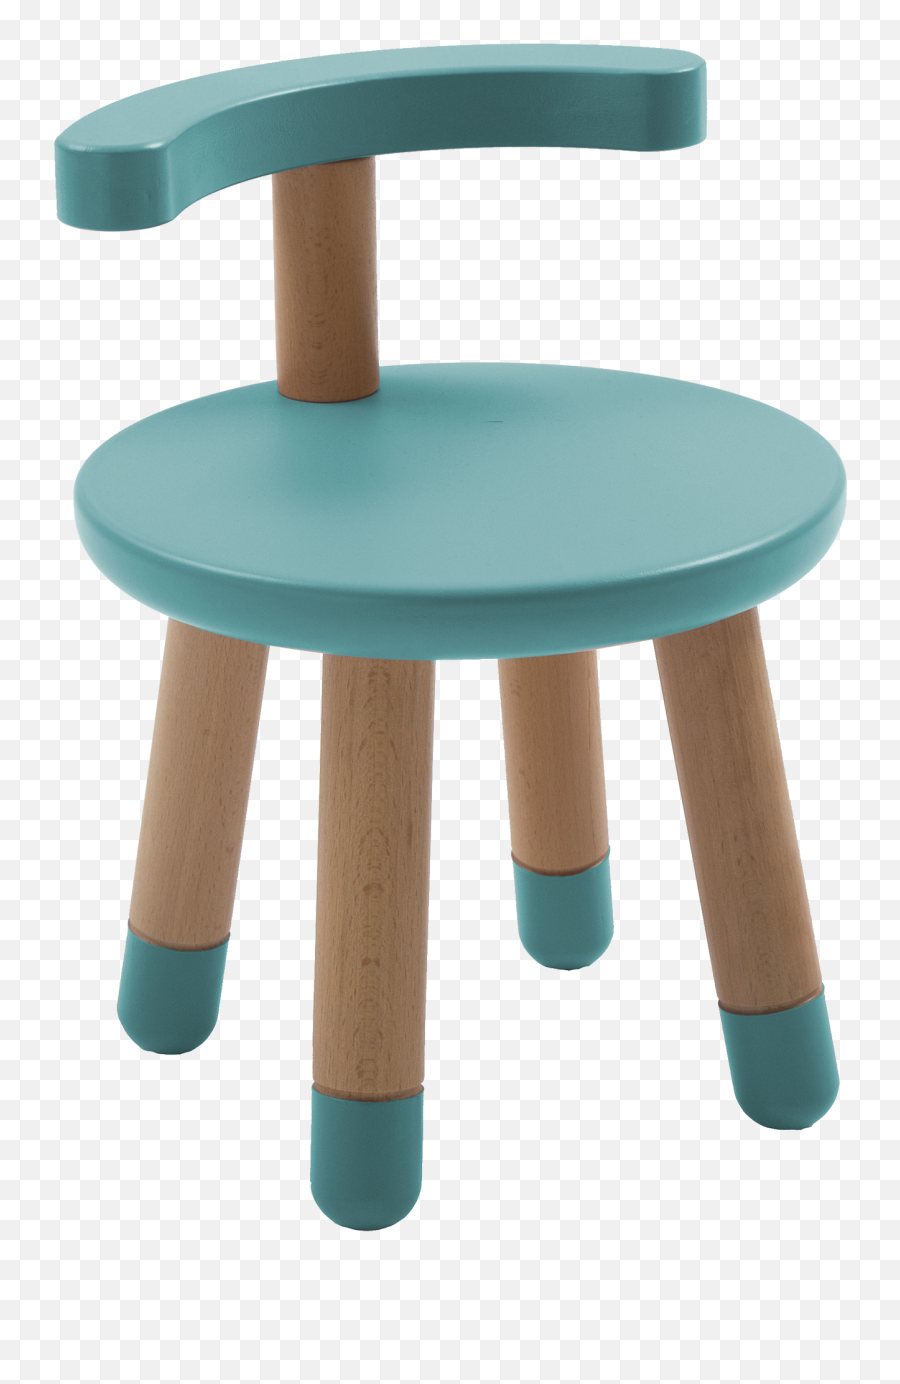 Table And Chairs Png - Mutable Chairs Chair 433848 Vippng Table,Chairs Png